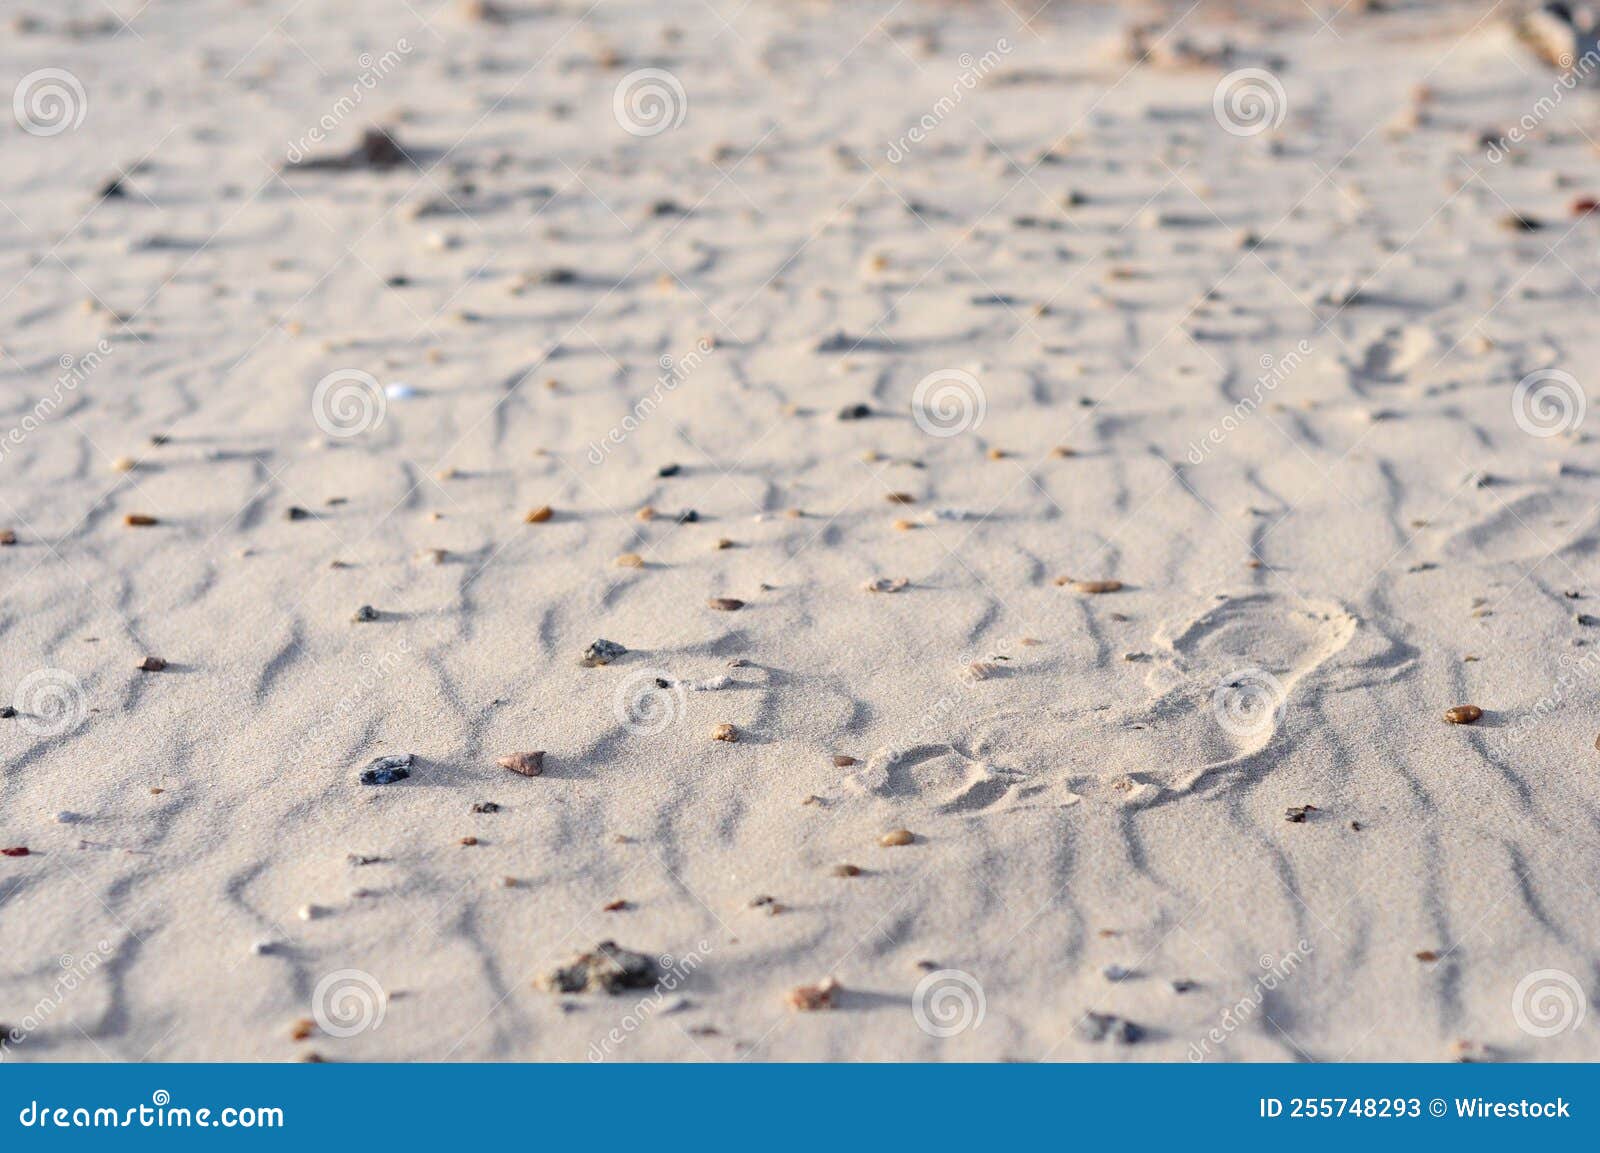 sand patterns with human footprints in juan lacaze's beach, colonia, uruguay